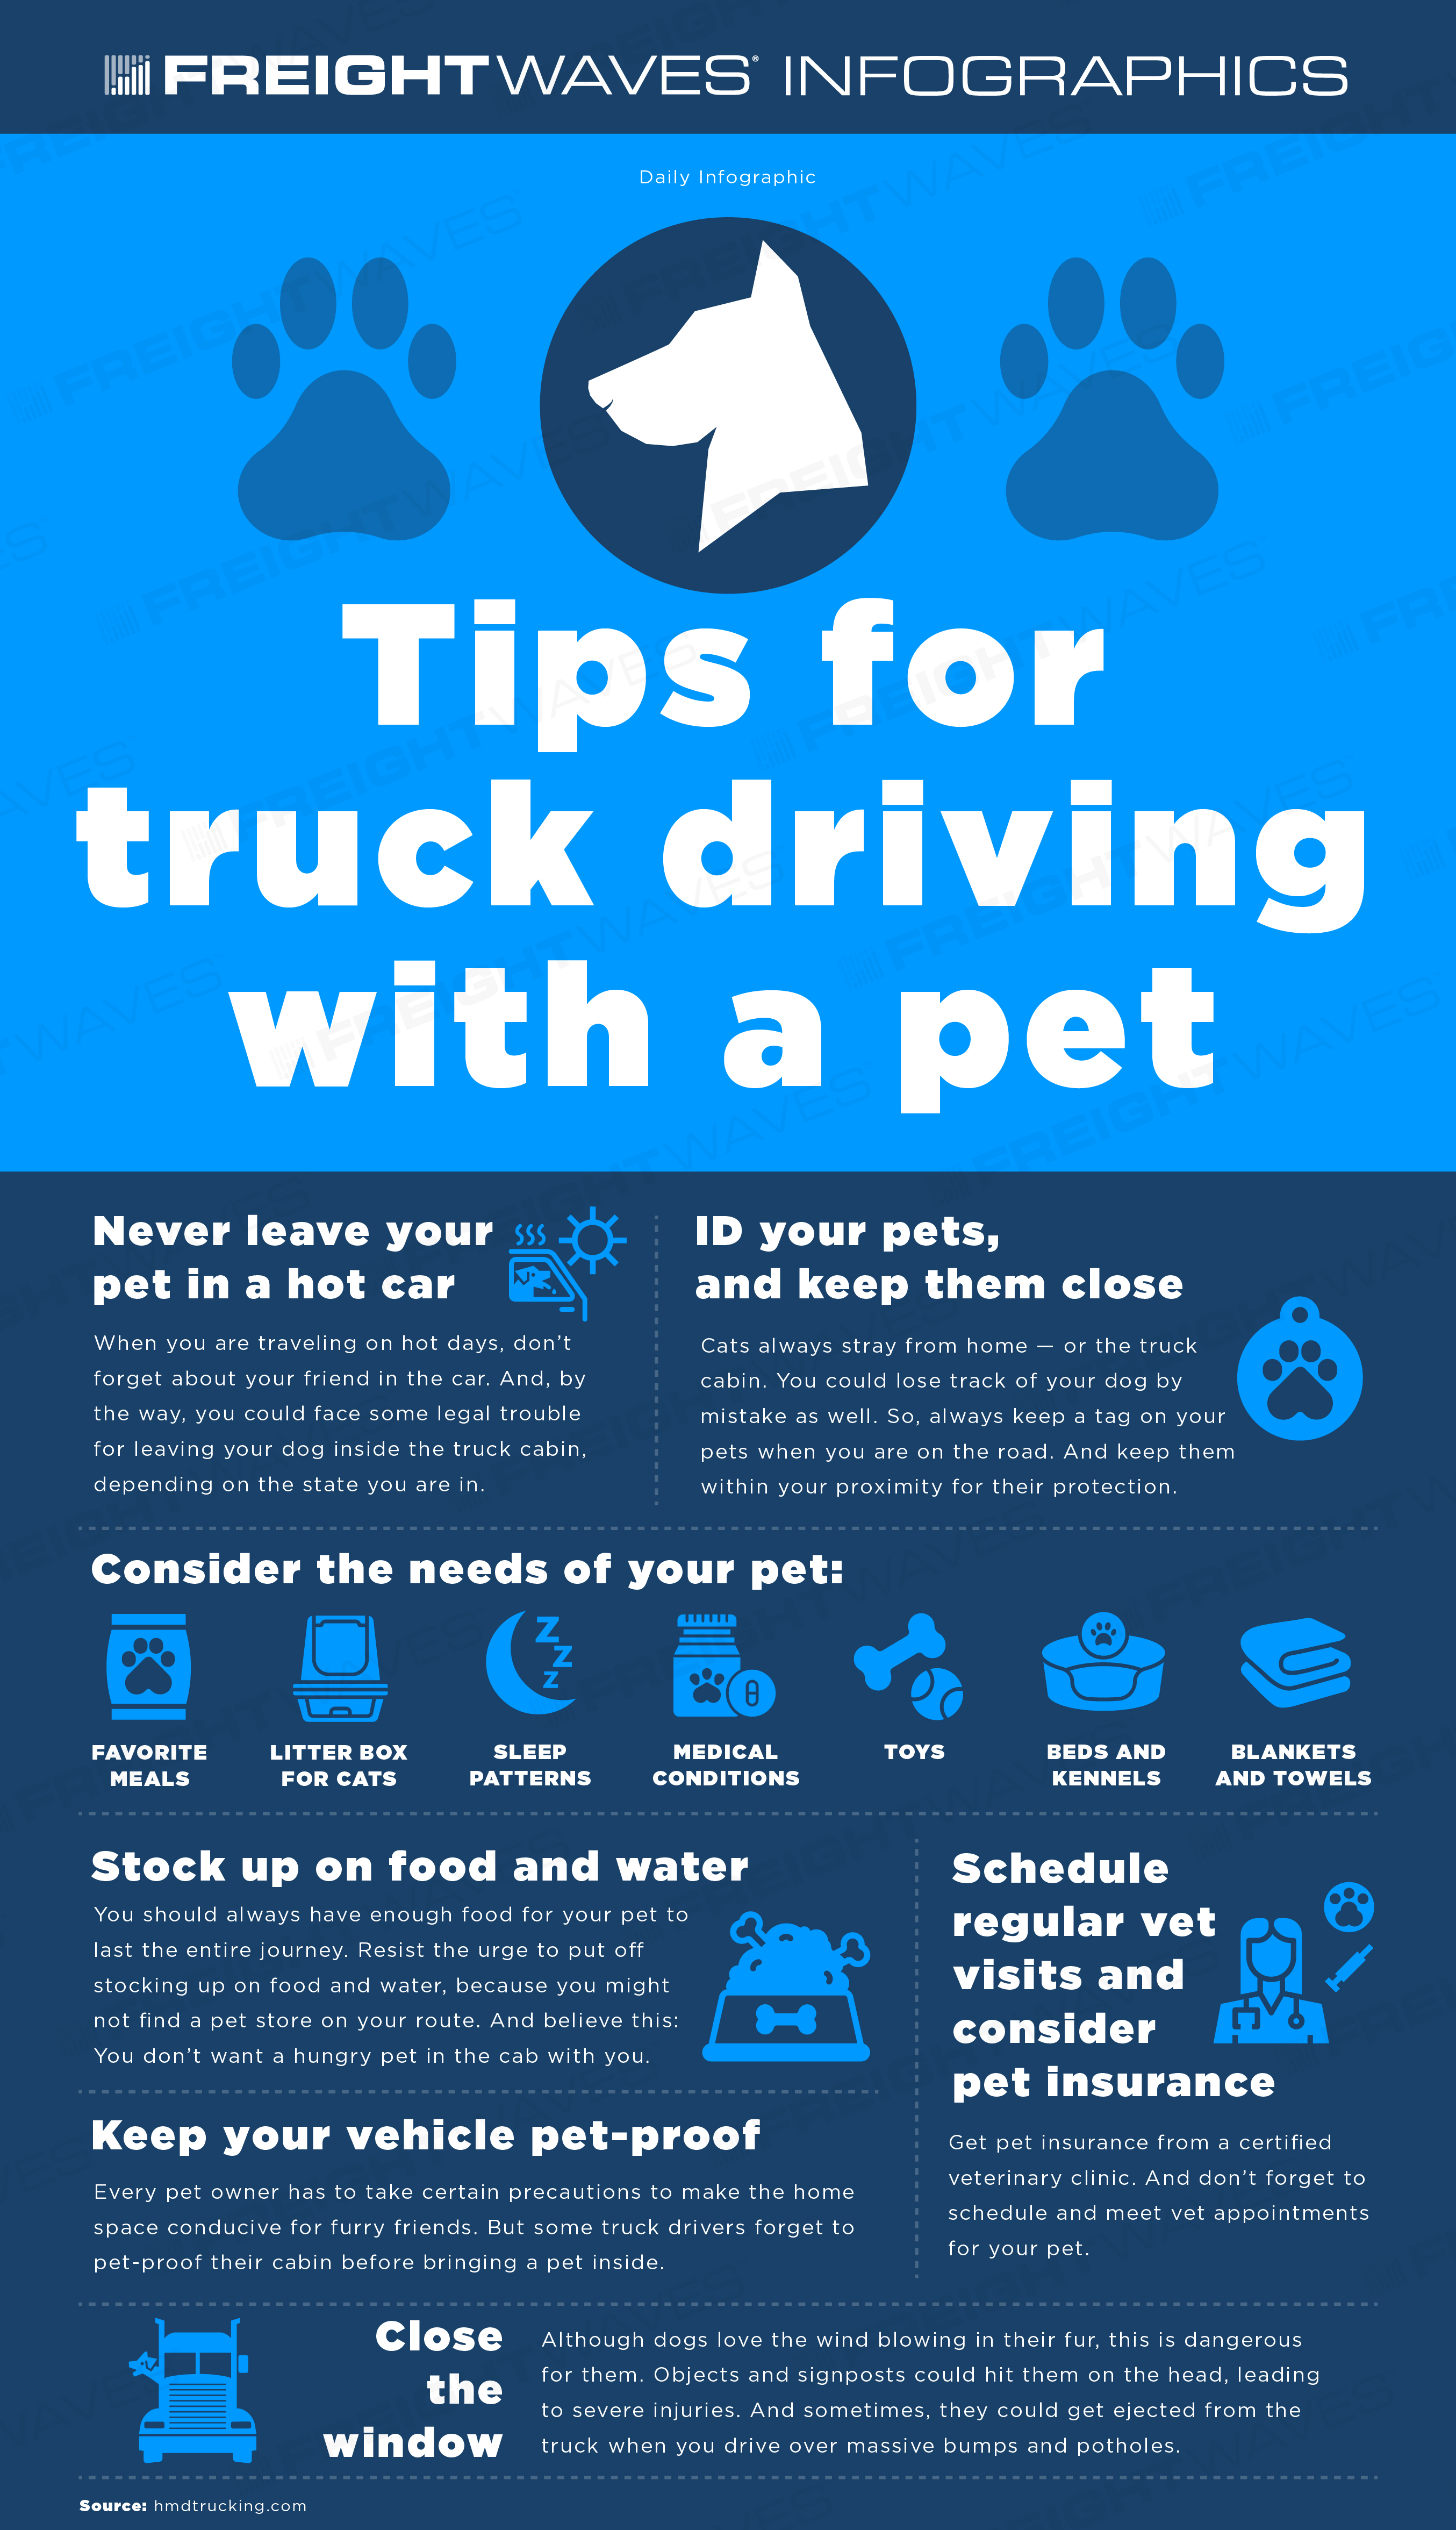 https://www.freightwaves.com/wp-content/uploads/2023/05/25/Tips-for-truck-driving-with-a-pet_05-26-23_full-ignore.jpg